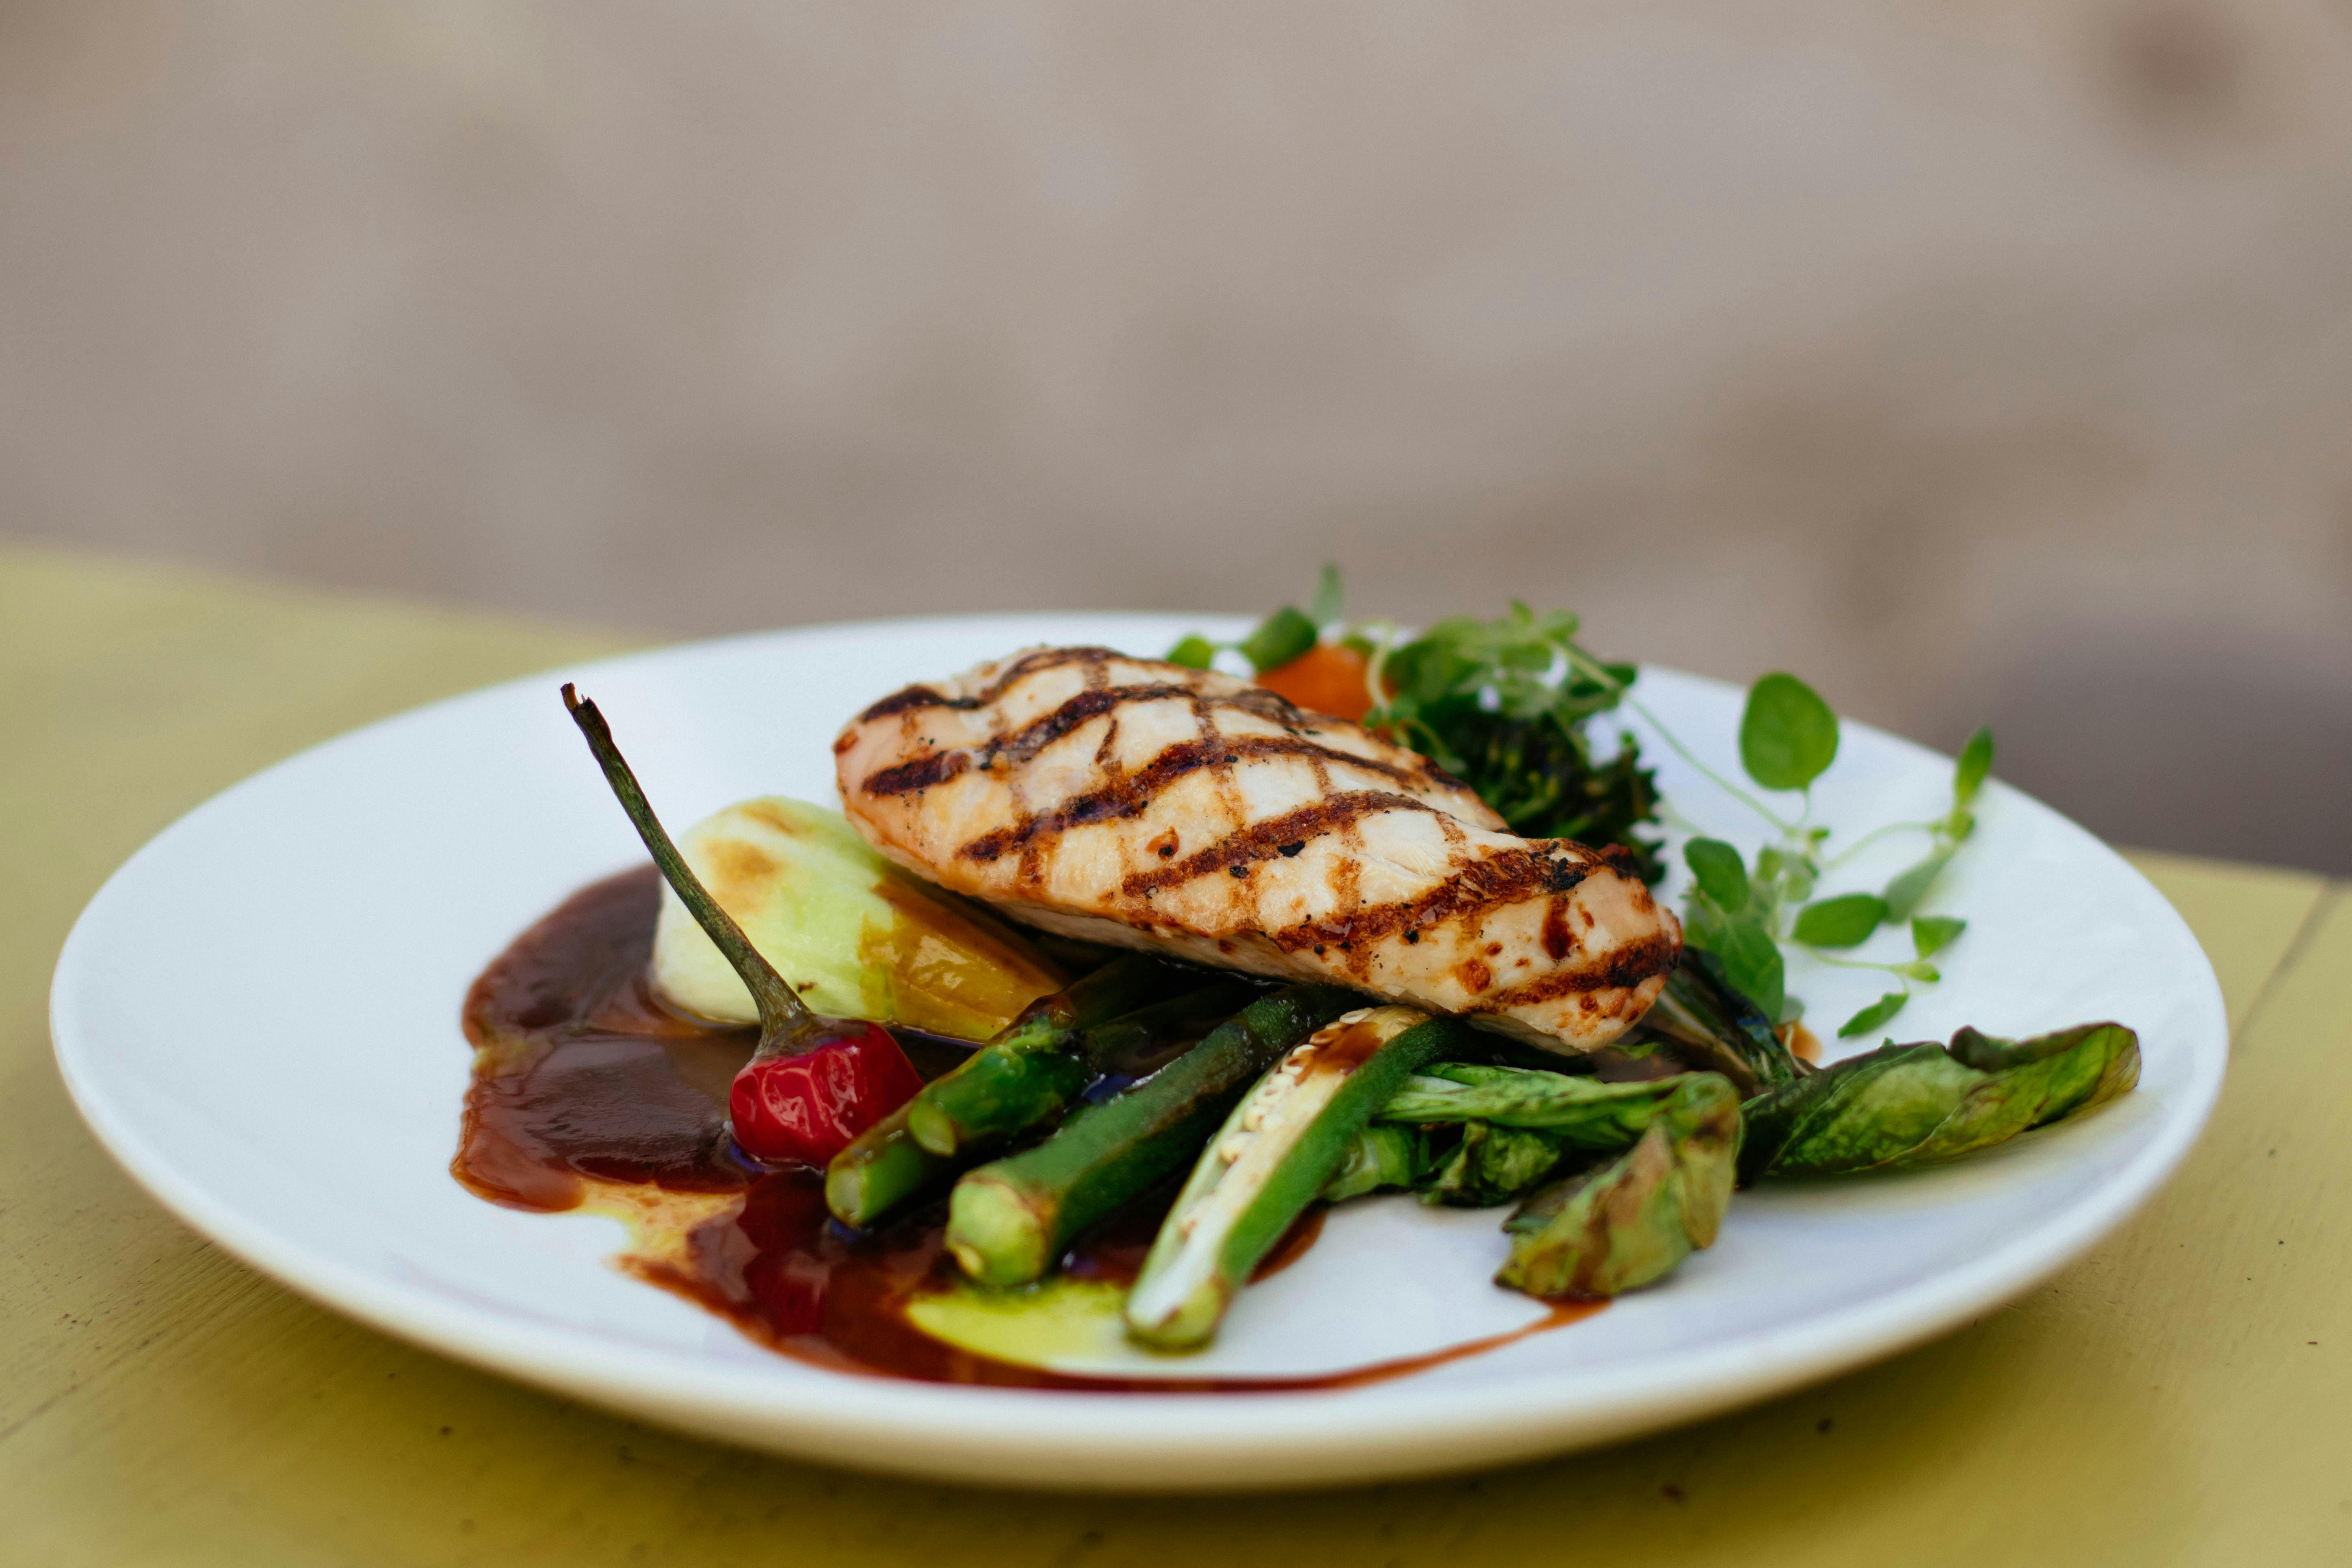 Super Delicious & Gluten-Free Meal Guide, Recipe Post #942:

Healthy Grilled Salmon With Asparagus